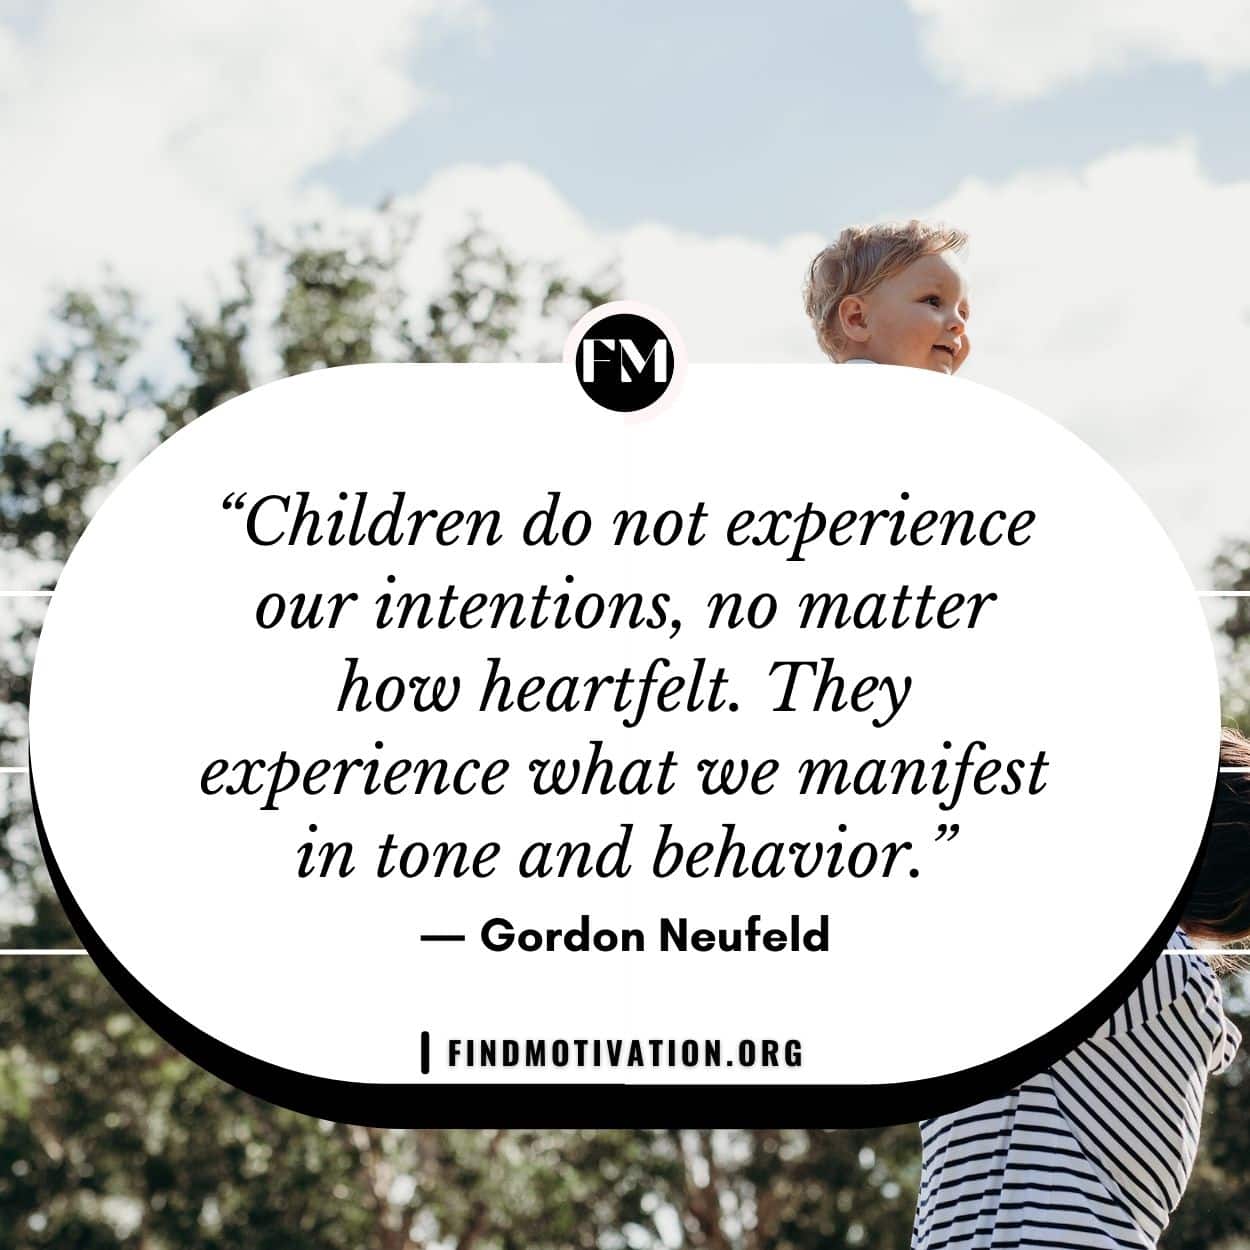 Motivational parenting quotes to take proper care of the child